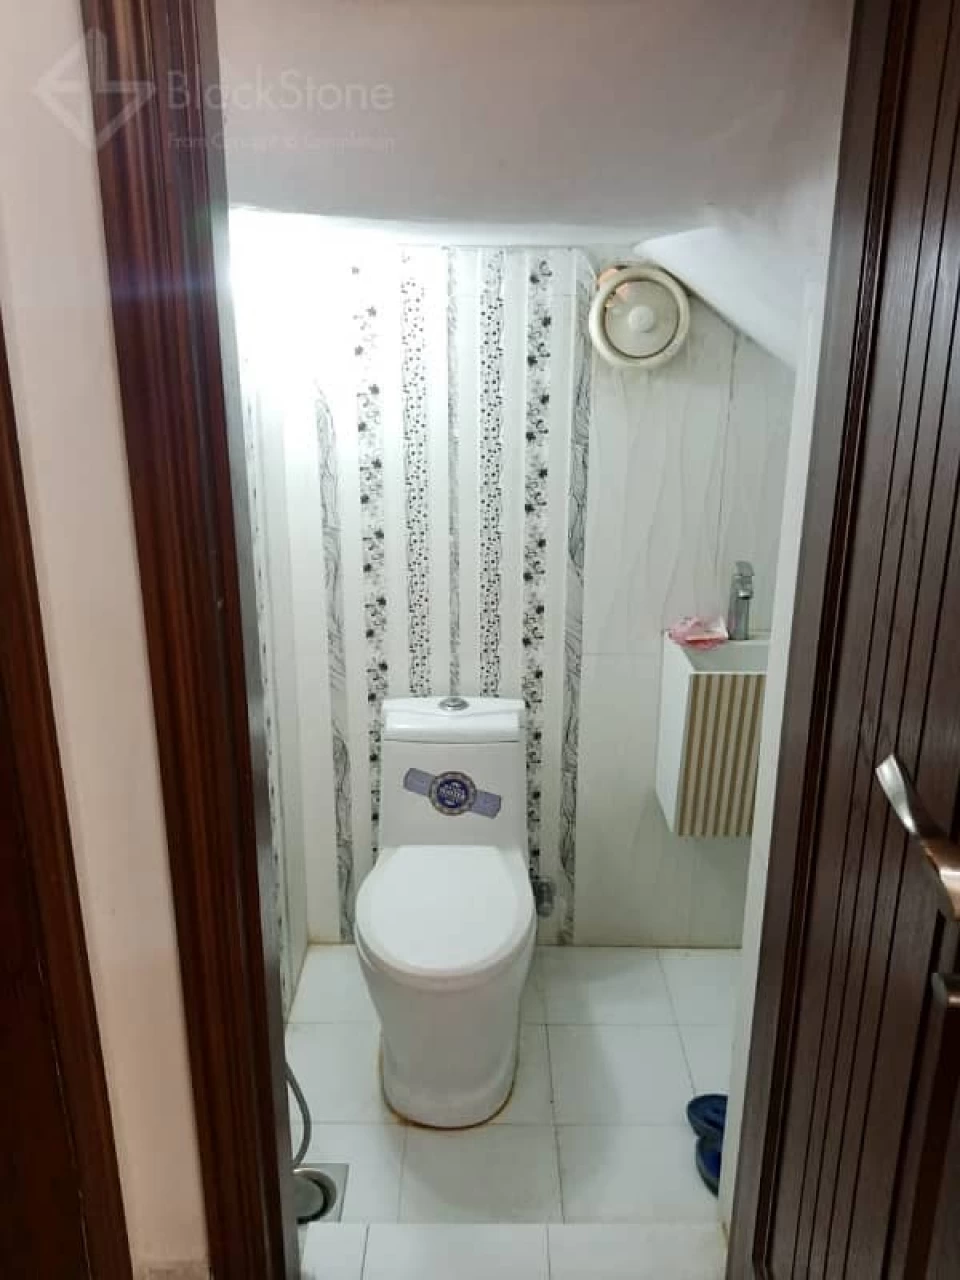 House For Sale in Lahore , House For Sale in DHA , House For Sale in DHA Lahore , House For Sale in DHA , 5 Marla House For Sale In DHA Phase 5 , DHA, Lahore Pakistan,3 Bedrooms Bedrooms, 3 Rooms Rooms, 4 BathroomsBathrooms, House,For Sale,2599